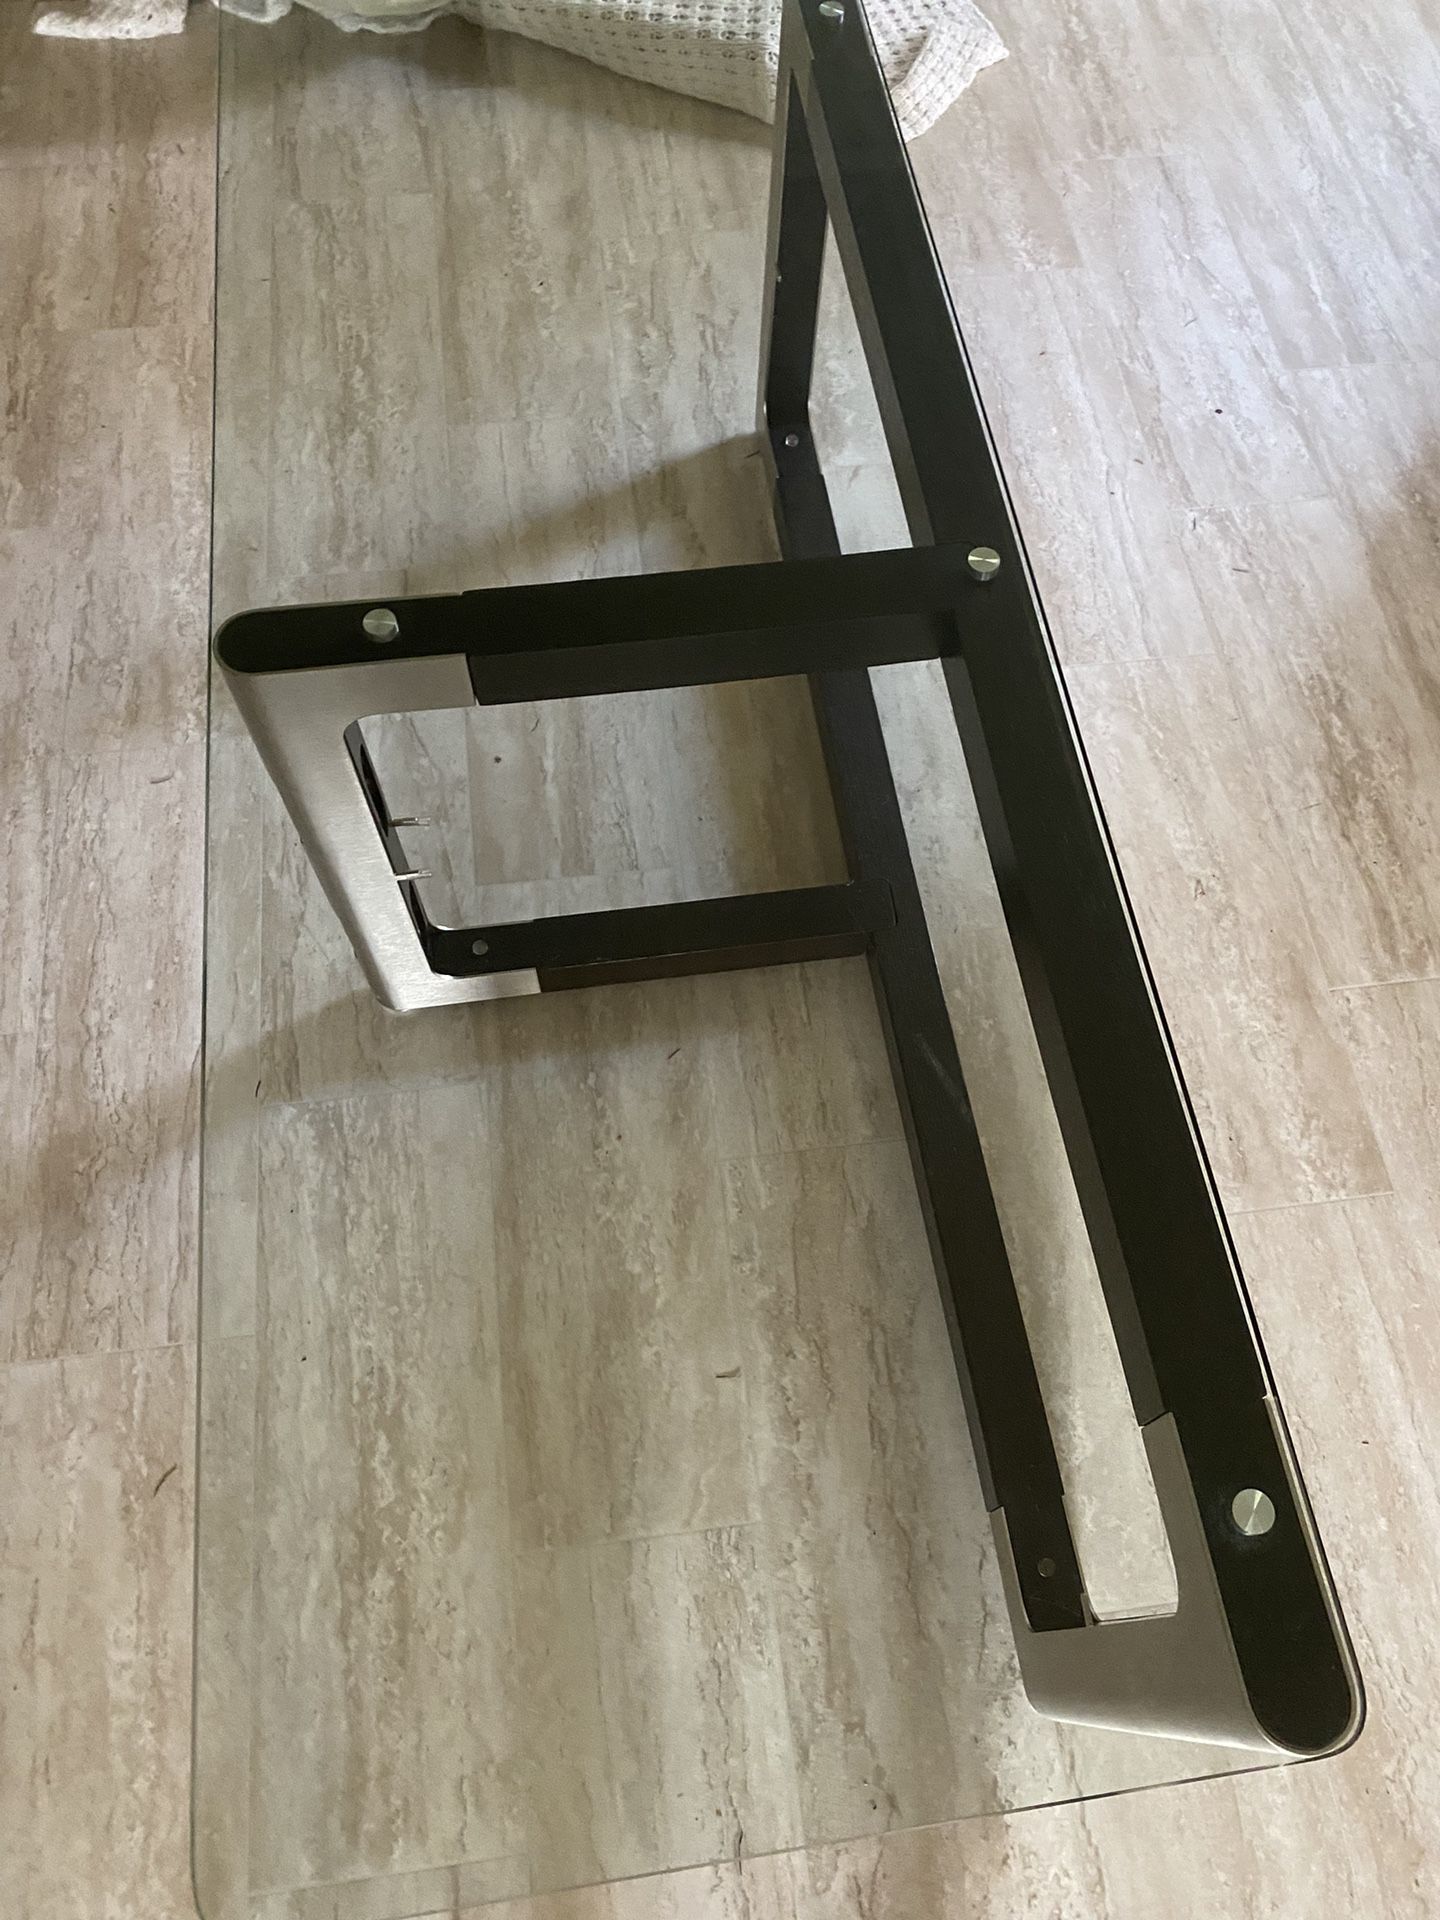 Table With Glass Shelves For TV Or Anything 